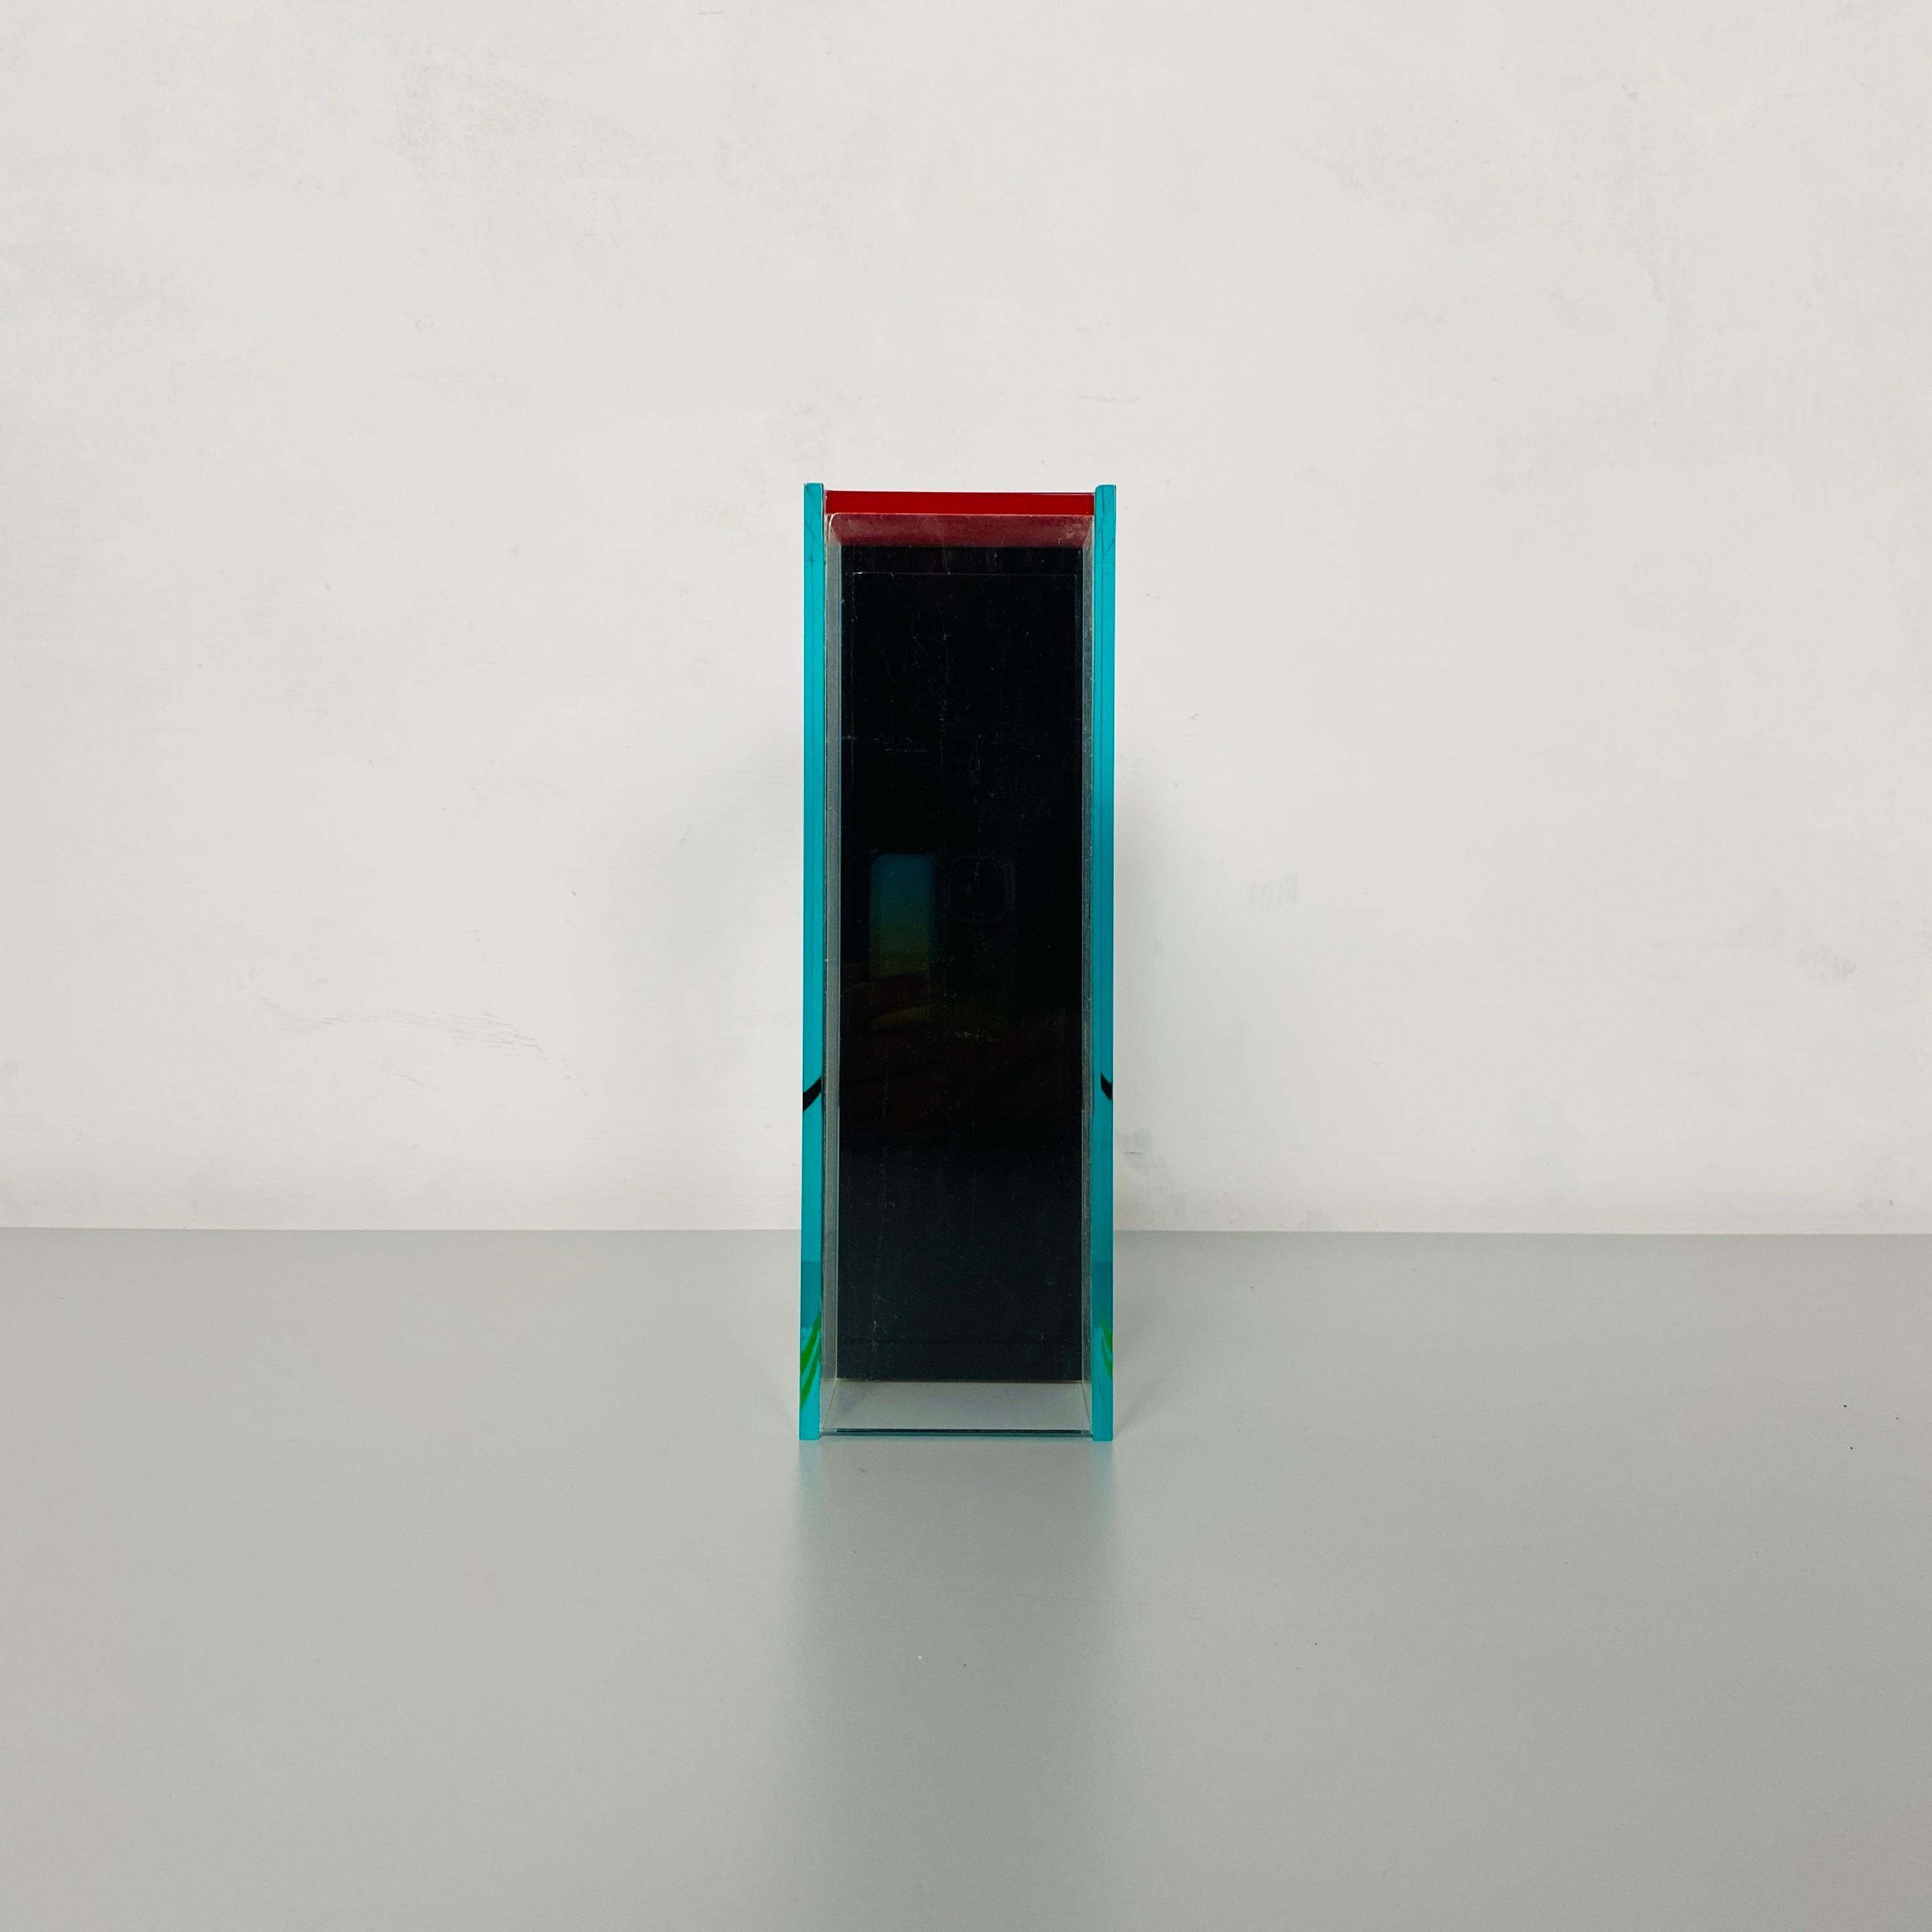 Late 20th Century Italian Mid-Century Modern Transparent and Colored Plexiglass Vase by PO, 1980s